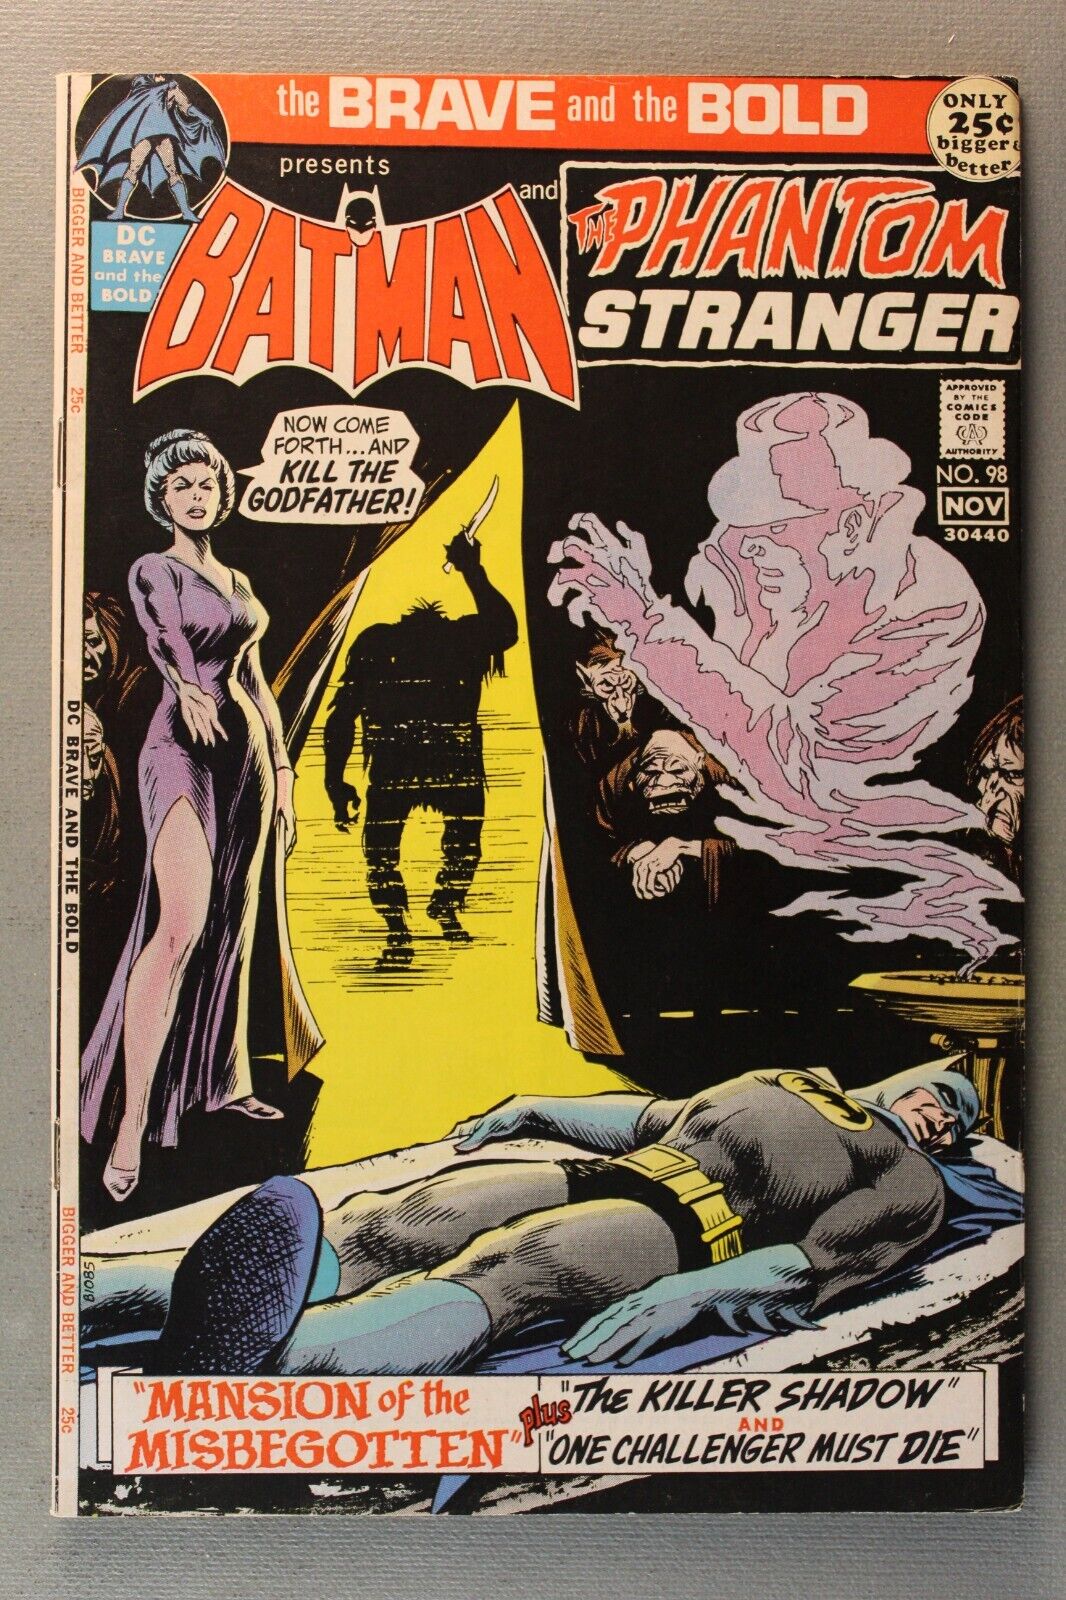 The Brave and the Bold #98 Presents Batman and The Phantom Stranger *1971* Nice